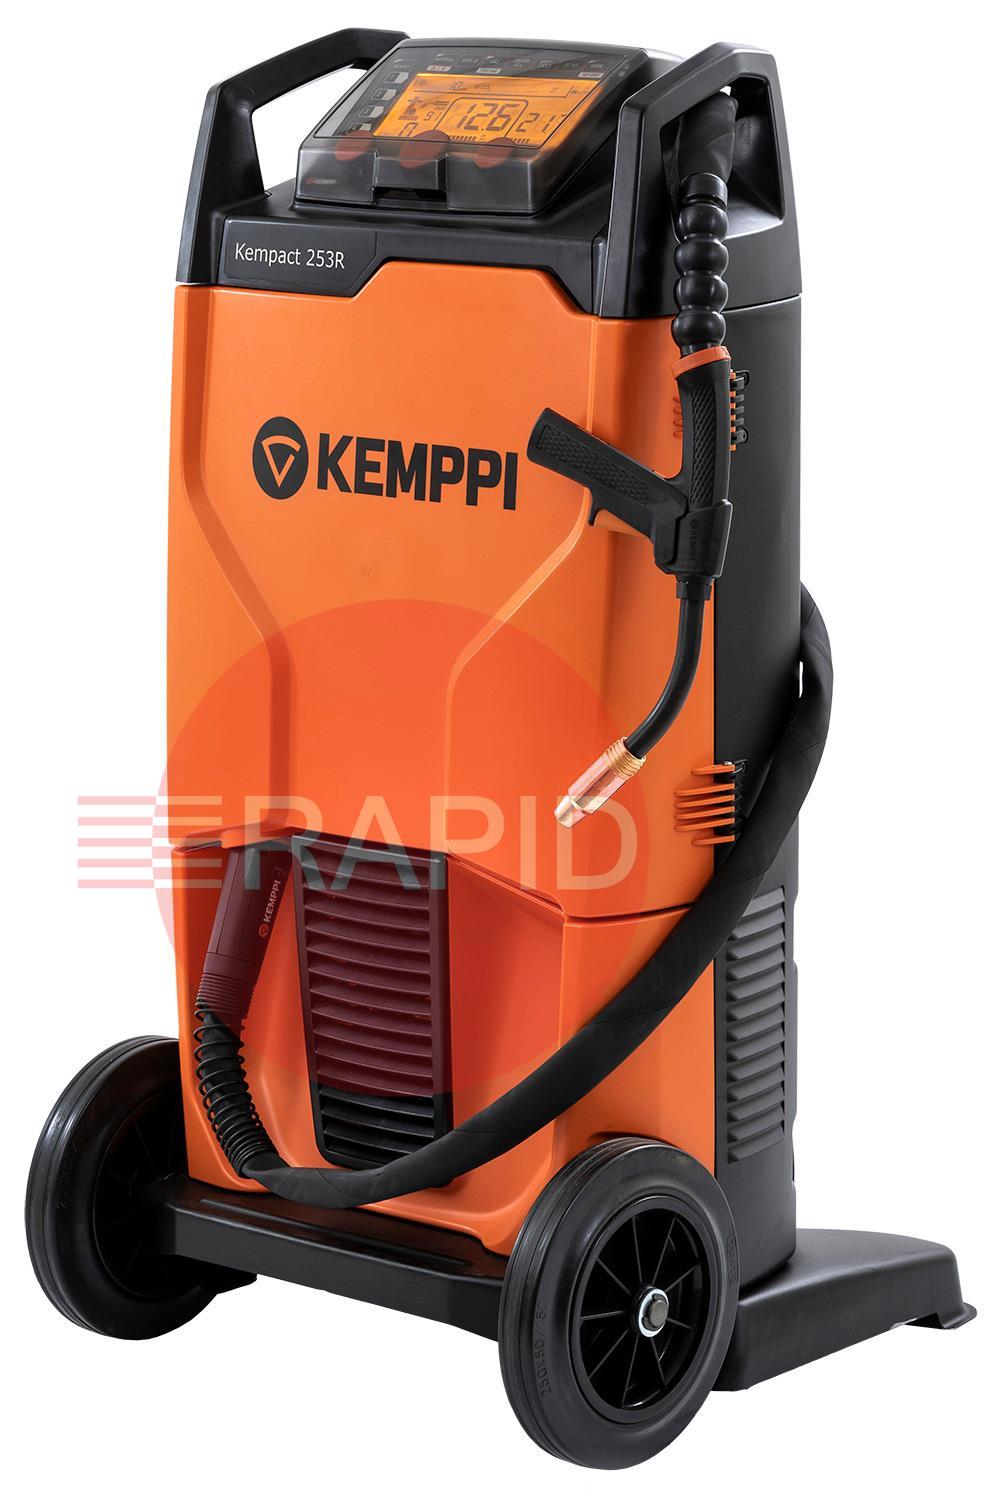 P2270GXE  Kemppi Kempact RA 253R, 250A 3 Phase 400v Mig Welder, with Flexlite GXe 205G 5m Torch